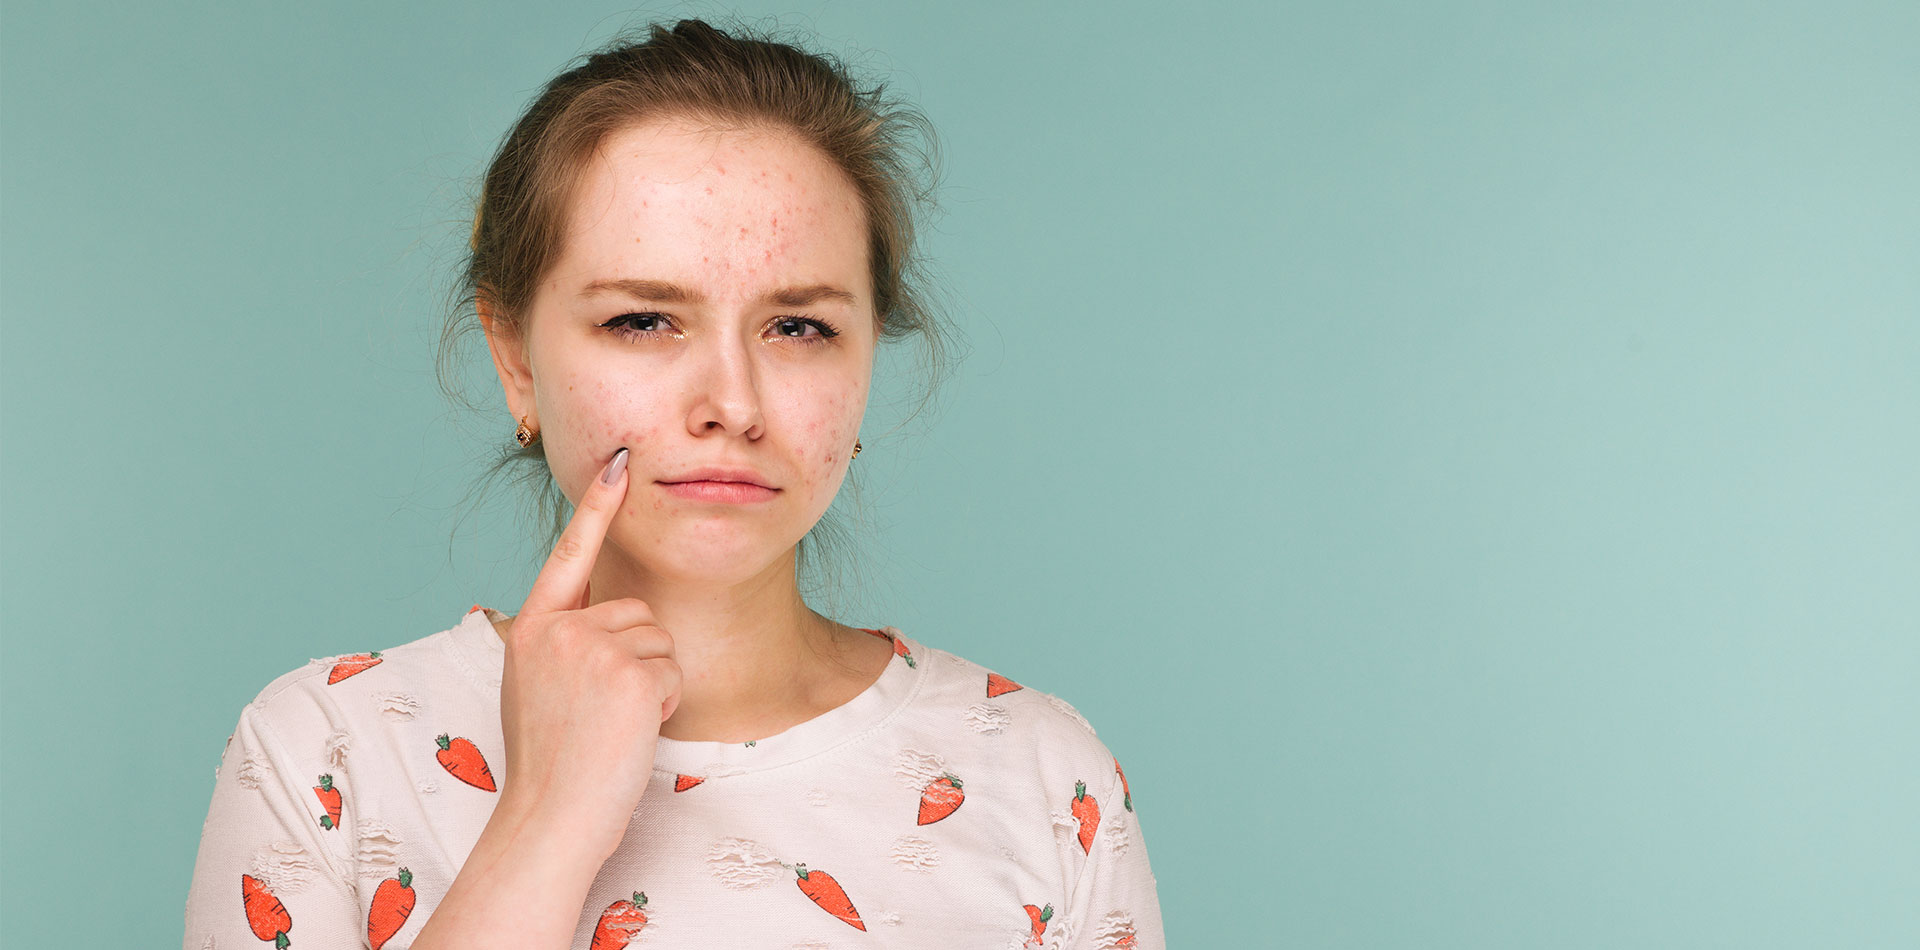 Acne Scars – All You Need to Know